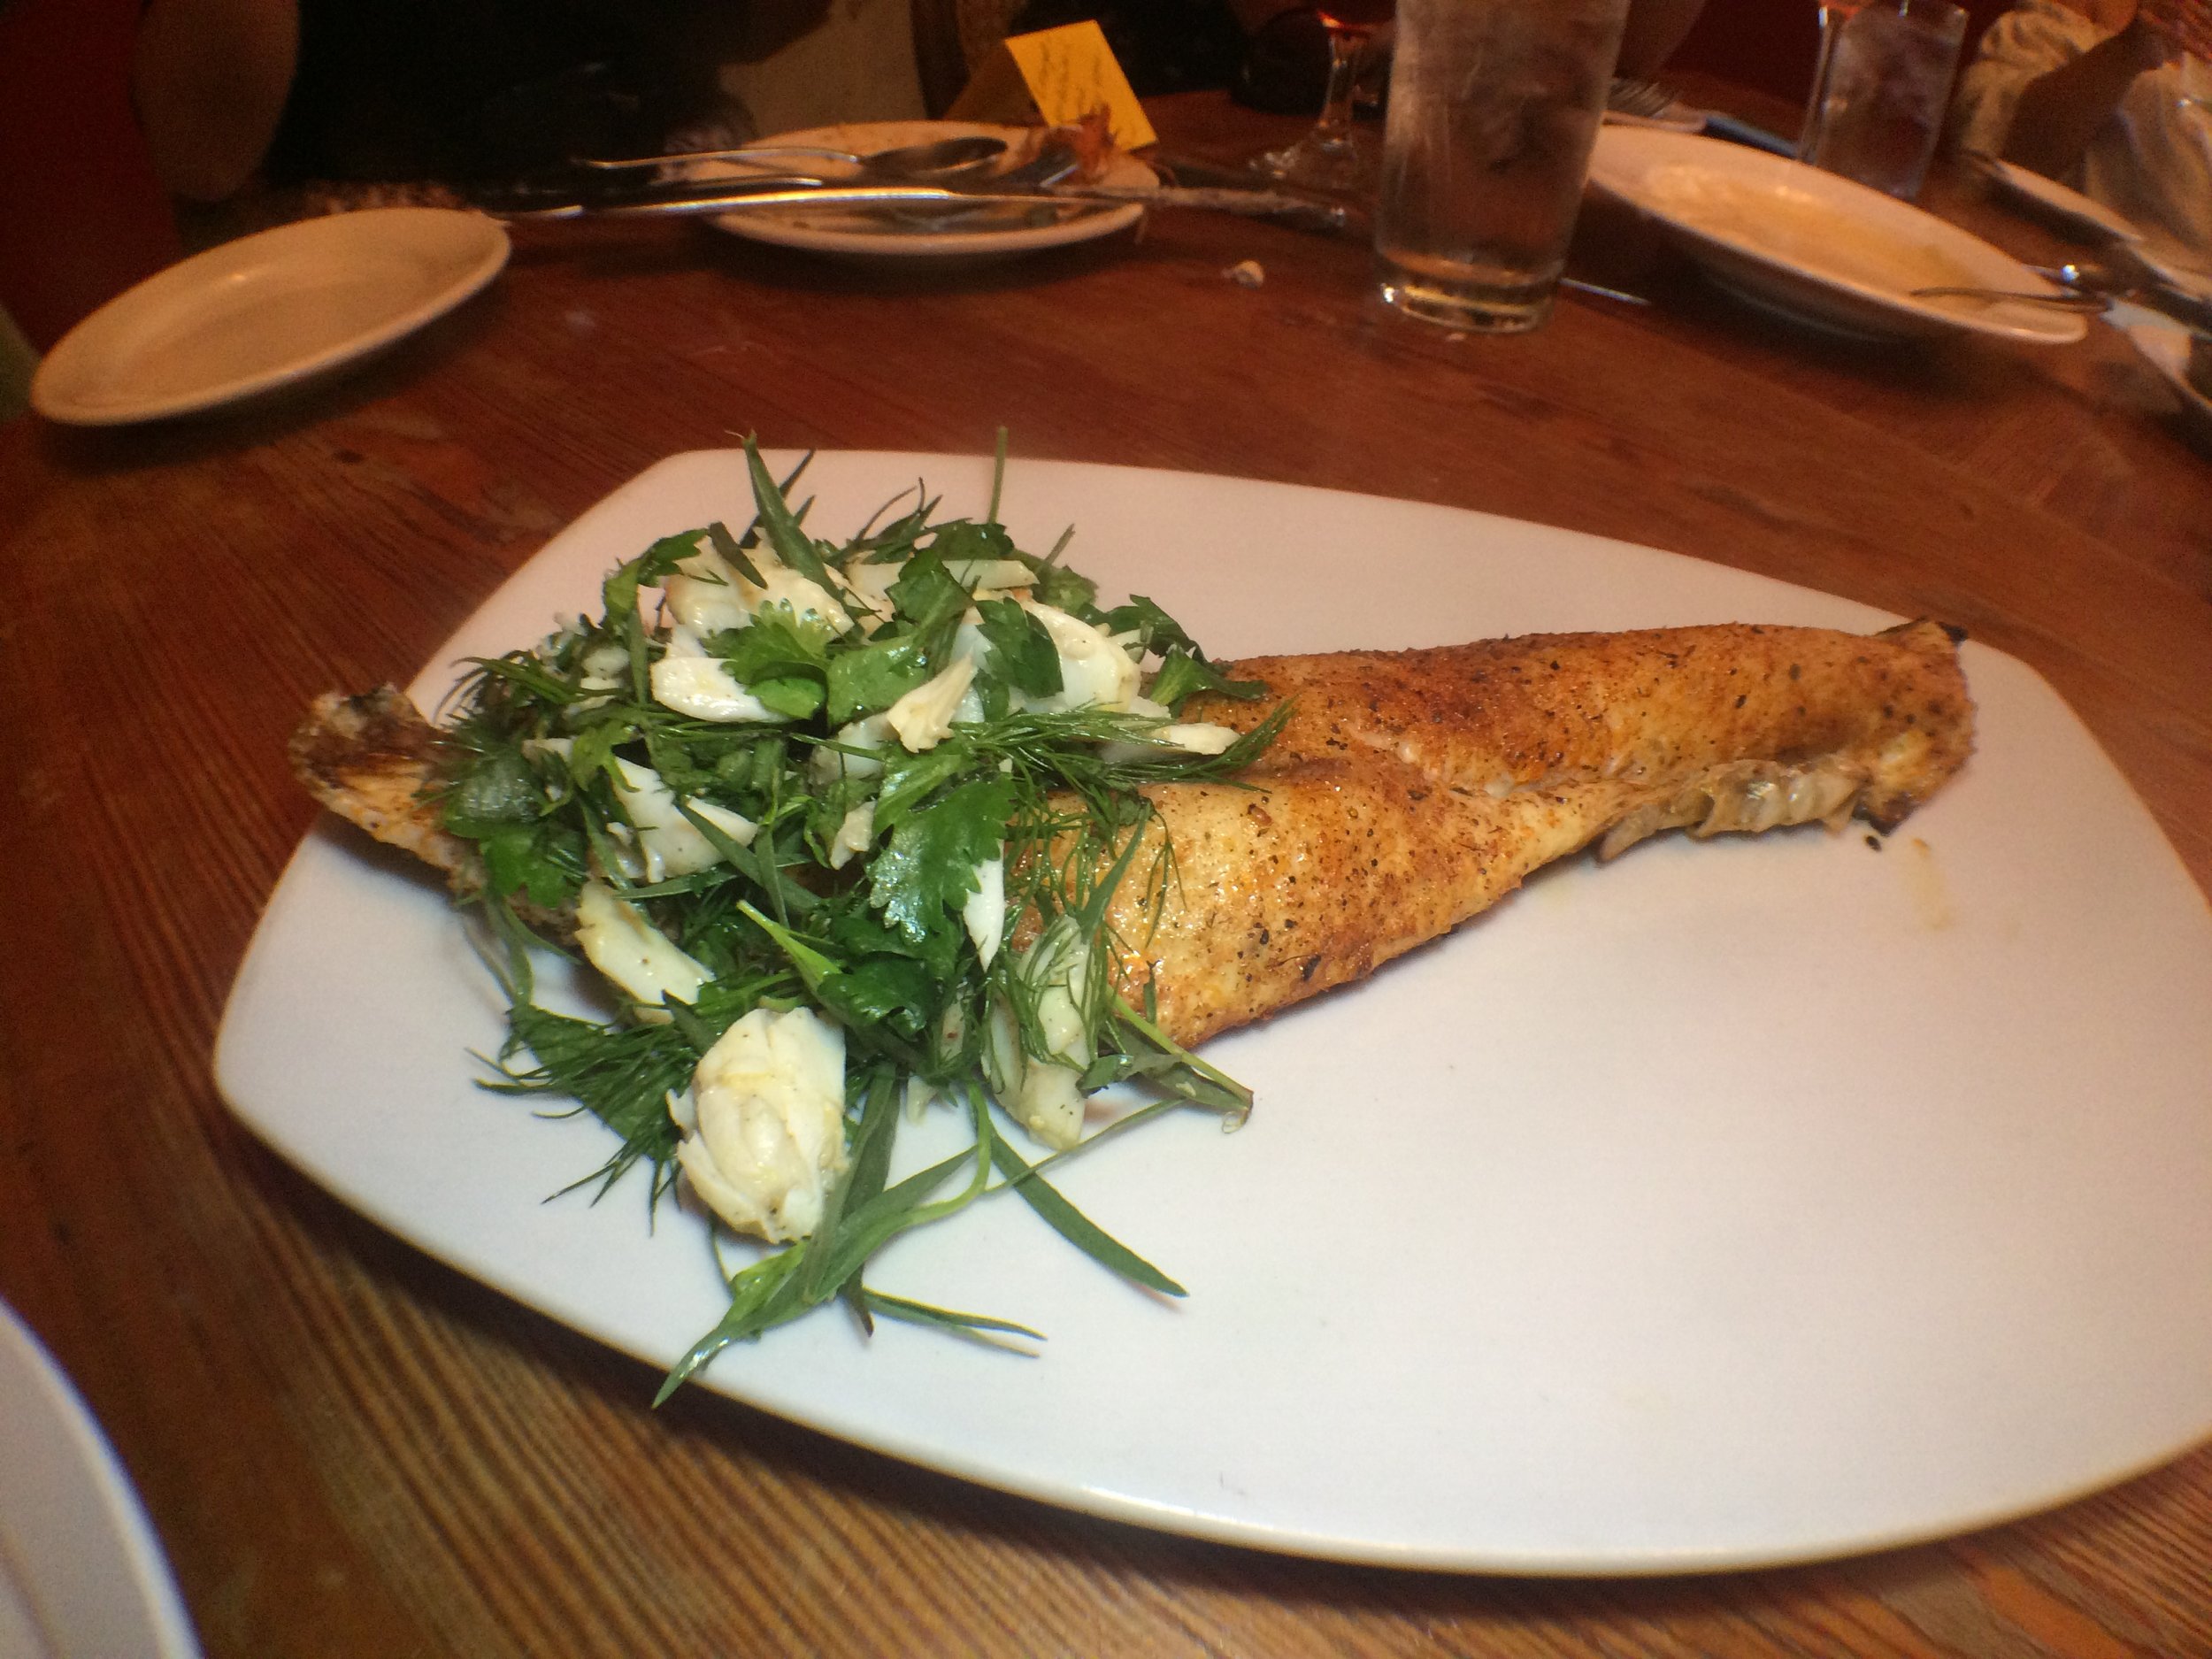  Redfish on the Half Shell  grilled Redfish on the half shell, crabmeat, soft herb salad 